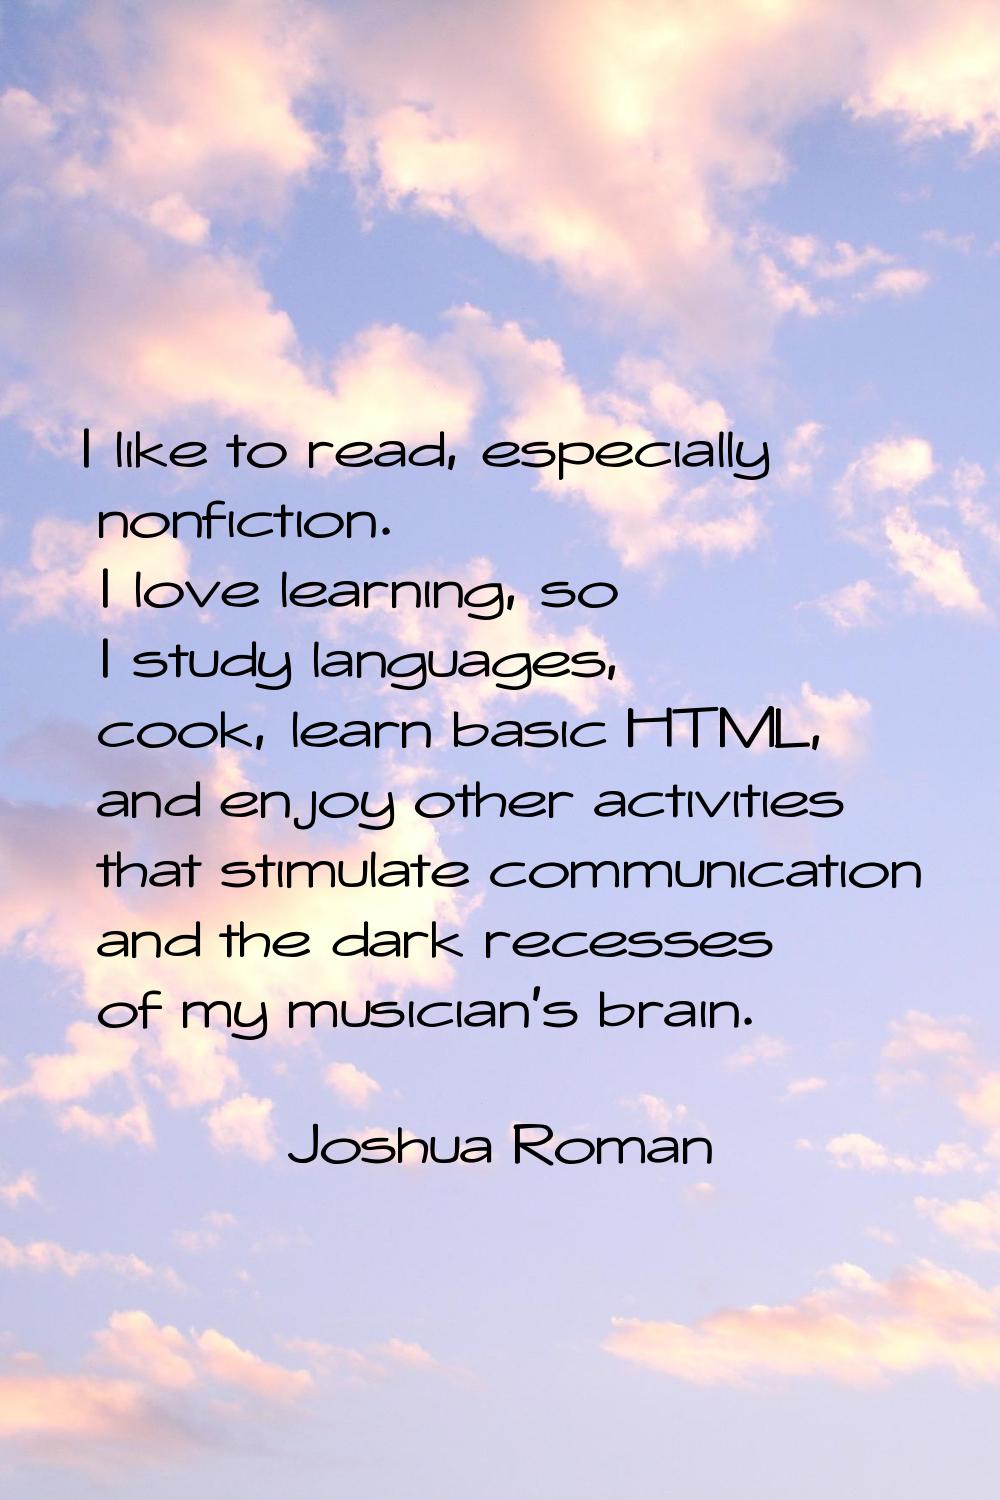 I like to read, especially nonfiction. I love learning, so I study languages, cook, learn basic HTM